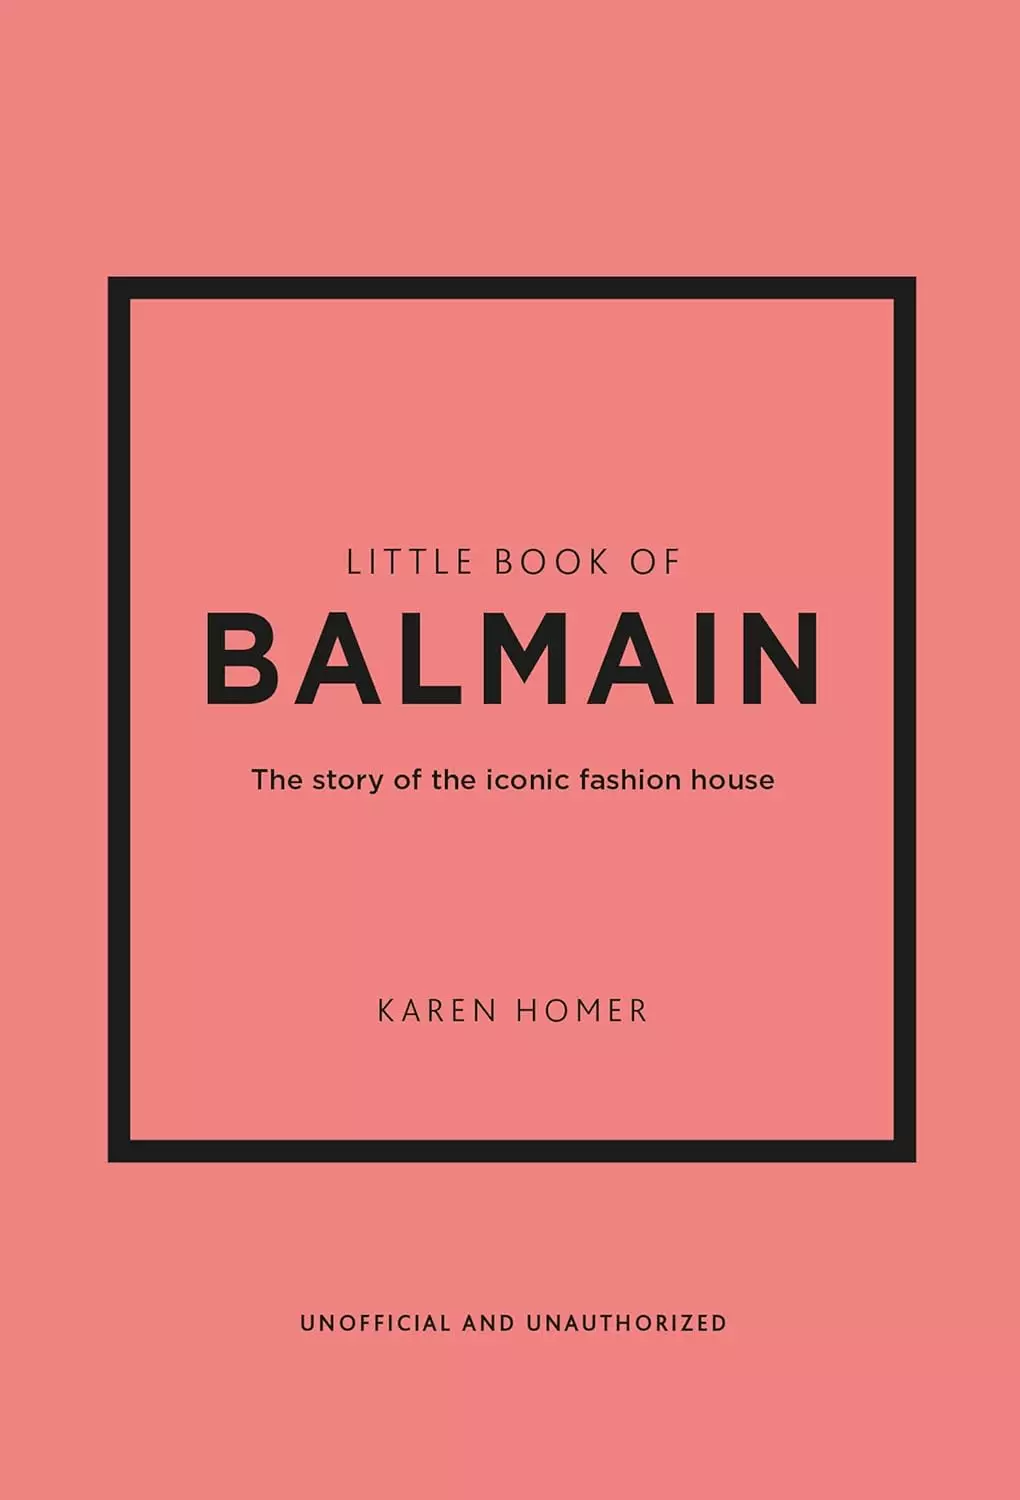 Гомер Карен - Little Book of Balmain: The story of the iconic fashion house (Little Books of Fashion, 28)